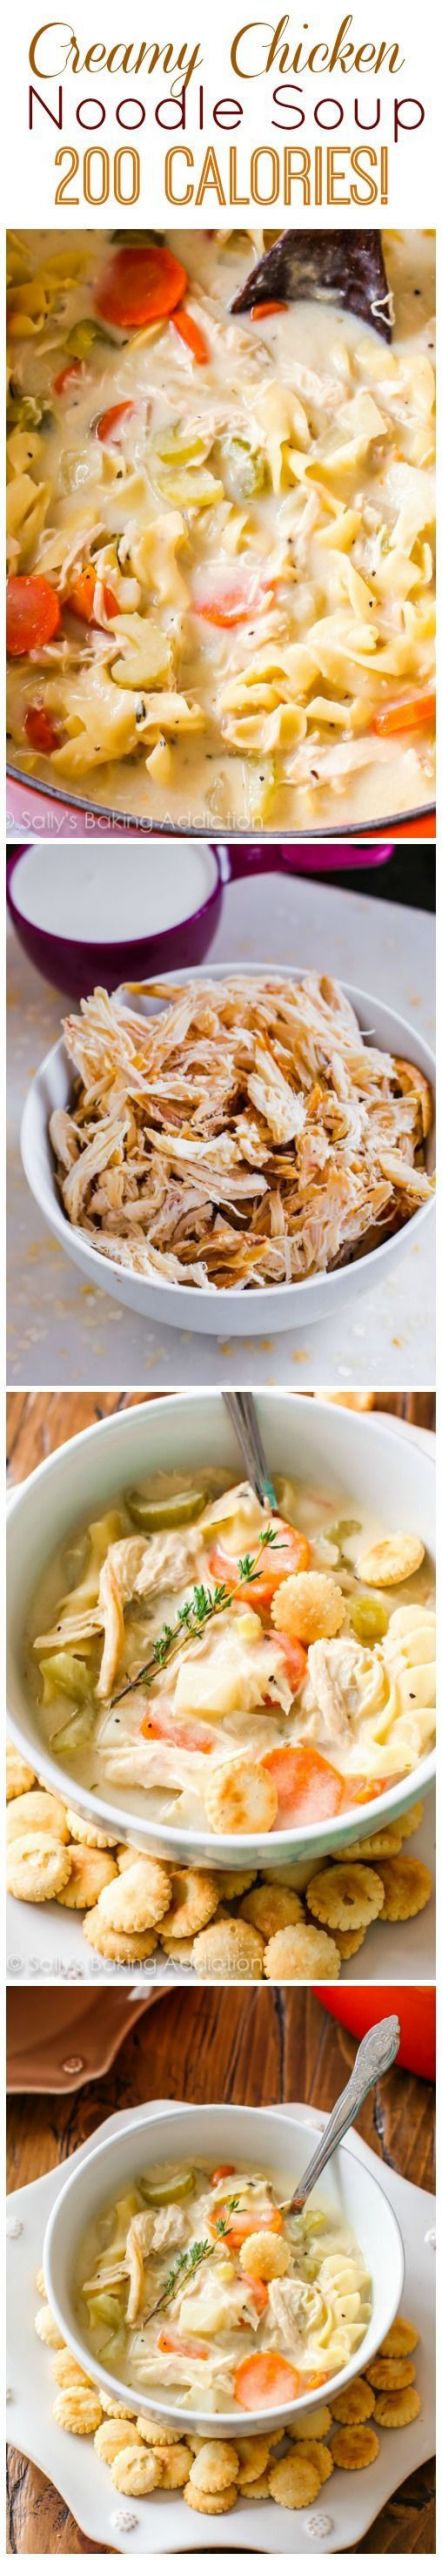 Low Calorie Chicken Noodle Soup
 This incredibly thick and forting soup has only 200